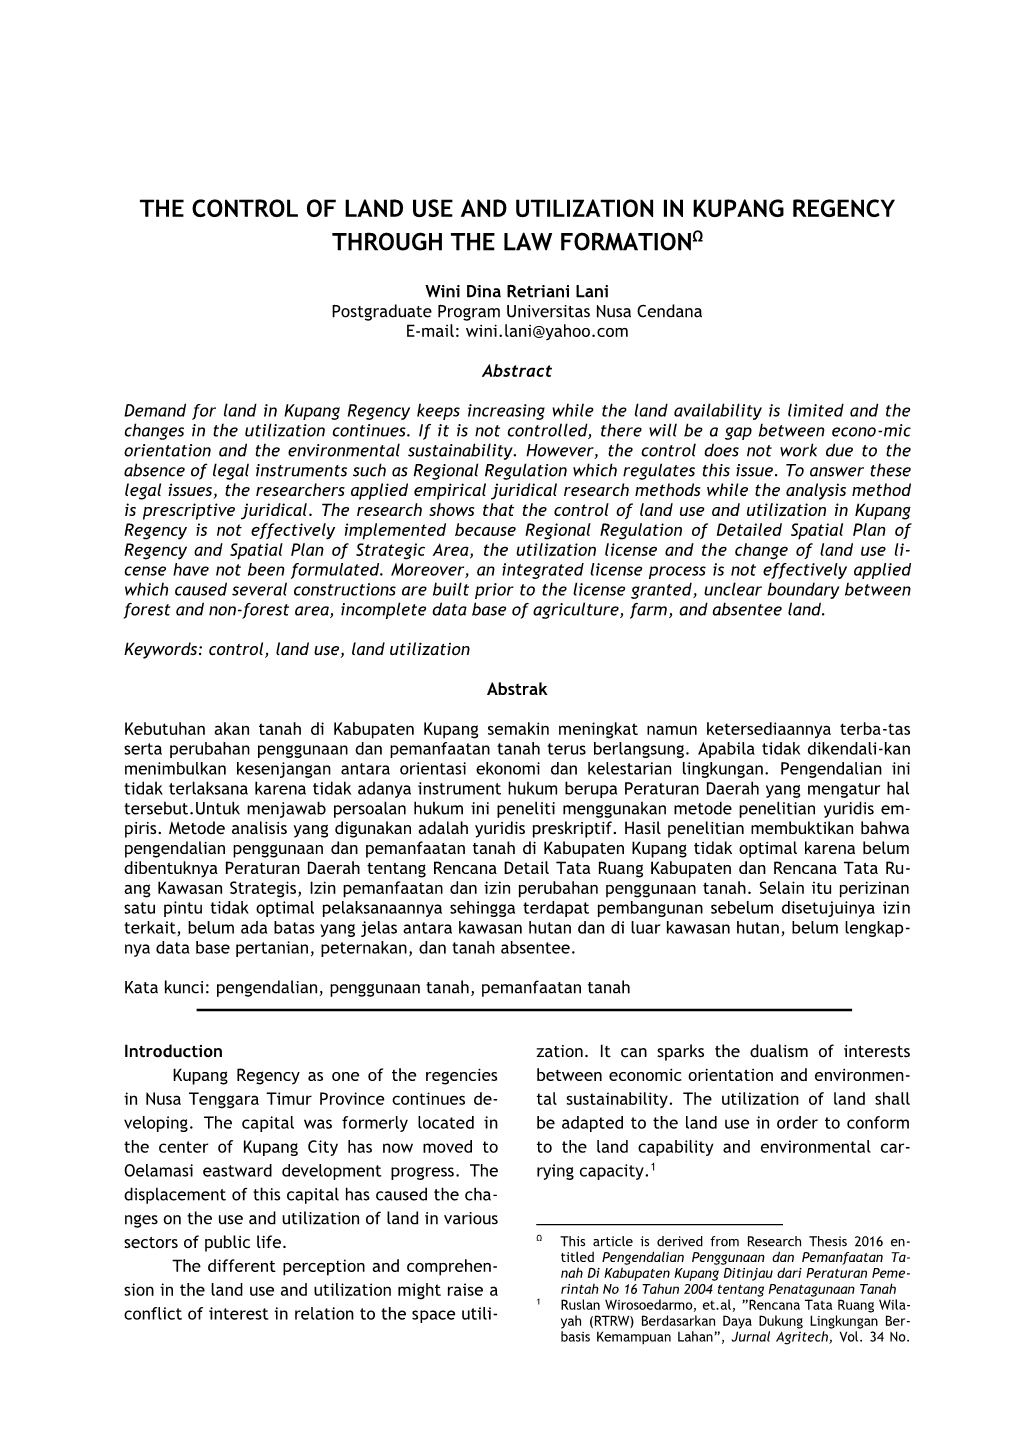 The Control of Land Use and Utilization in Kupang Regency Through the Law Formationω